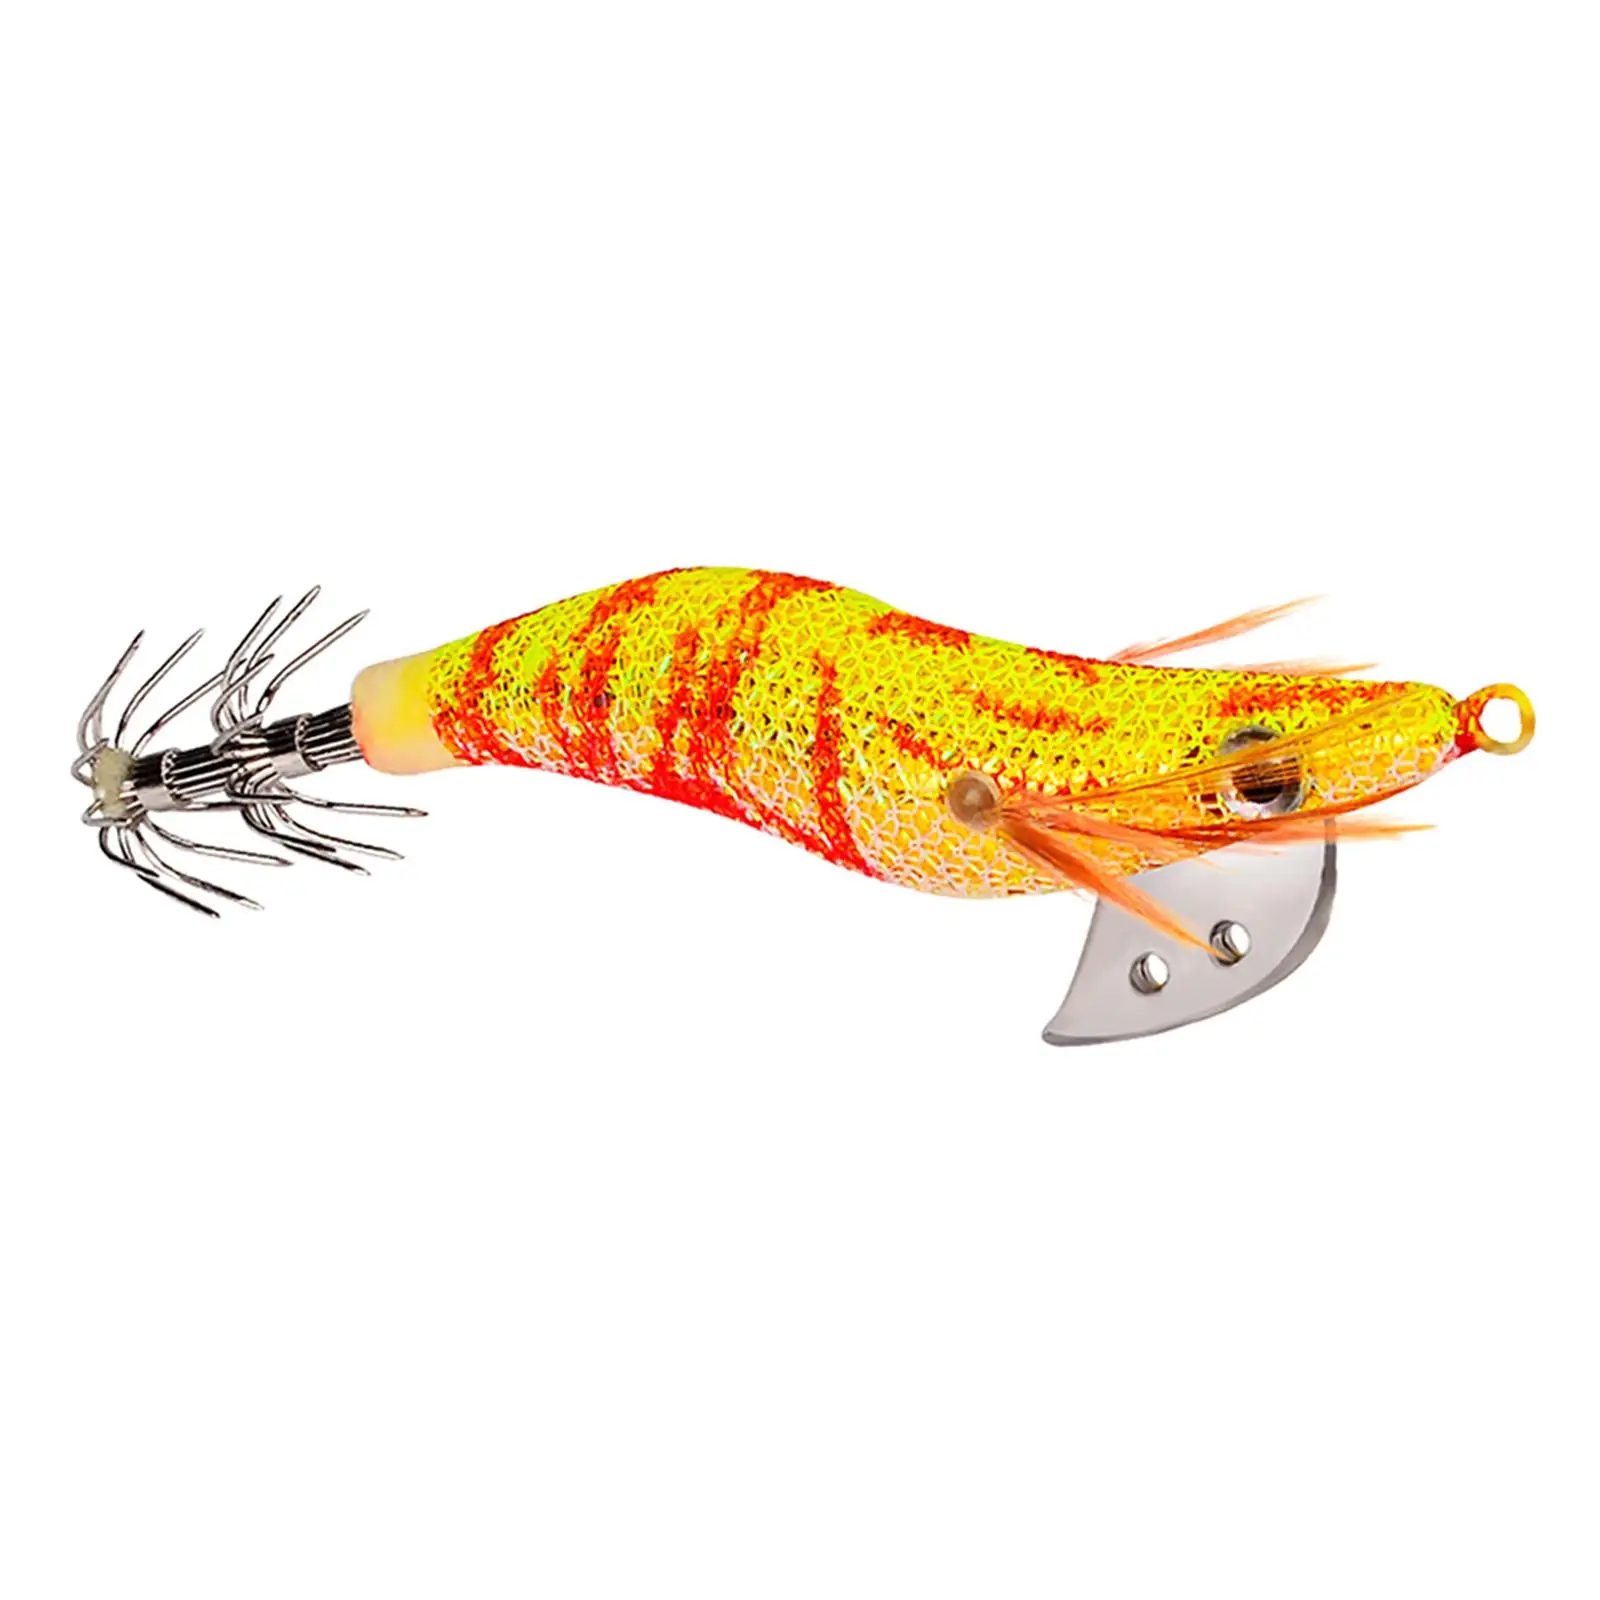 Trout Lures Bright Colors Attracting Effect 3.35inch Squid Jig Hooks for Anglers Gift Mandarin Fish All Waters Freshwater